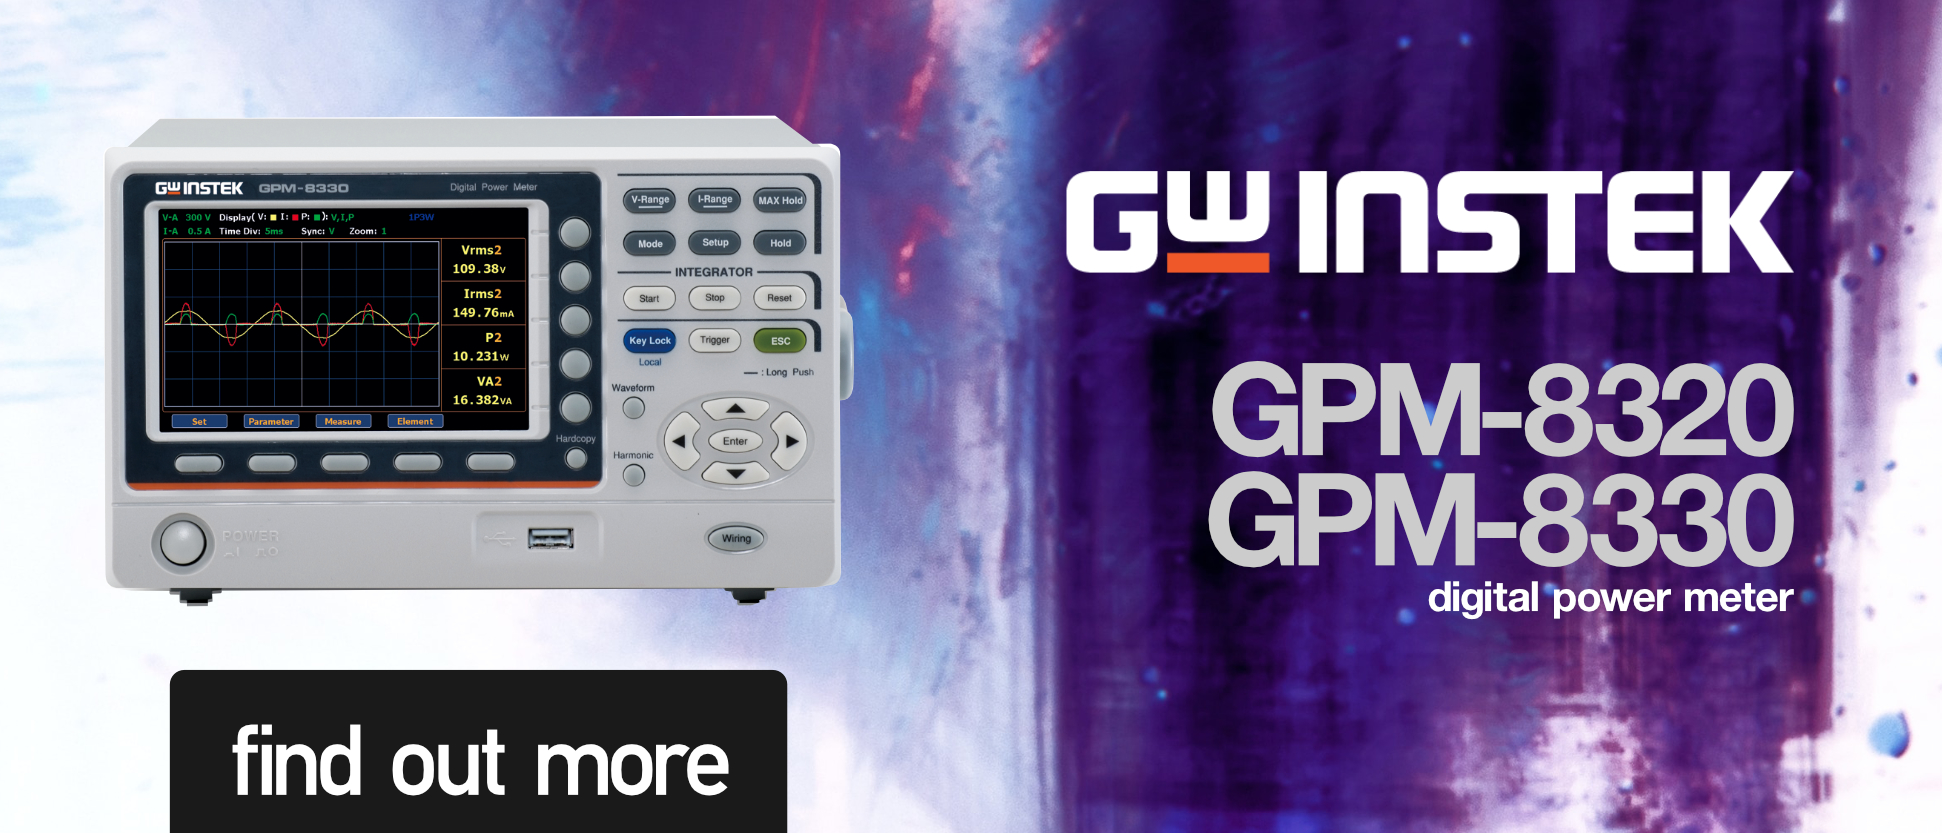 Introduction-GPM-8330 Three Phase Digital Power Meter